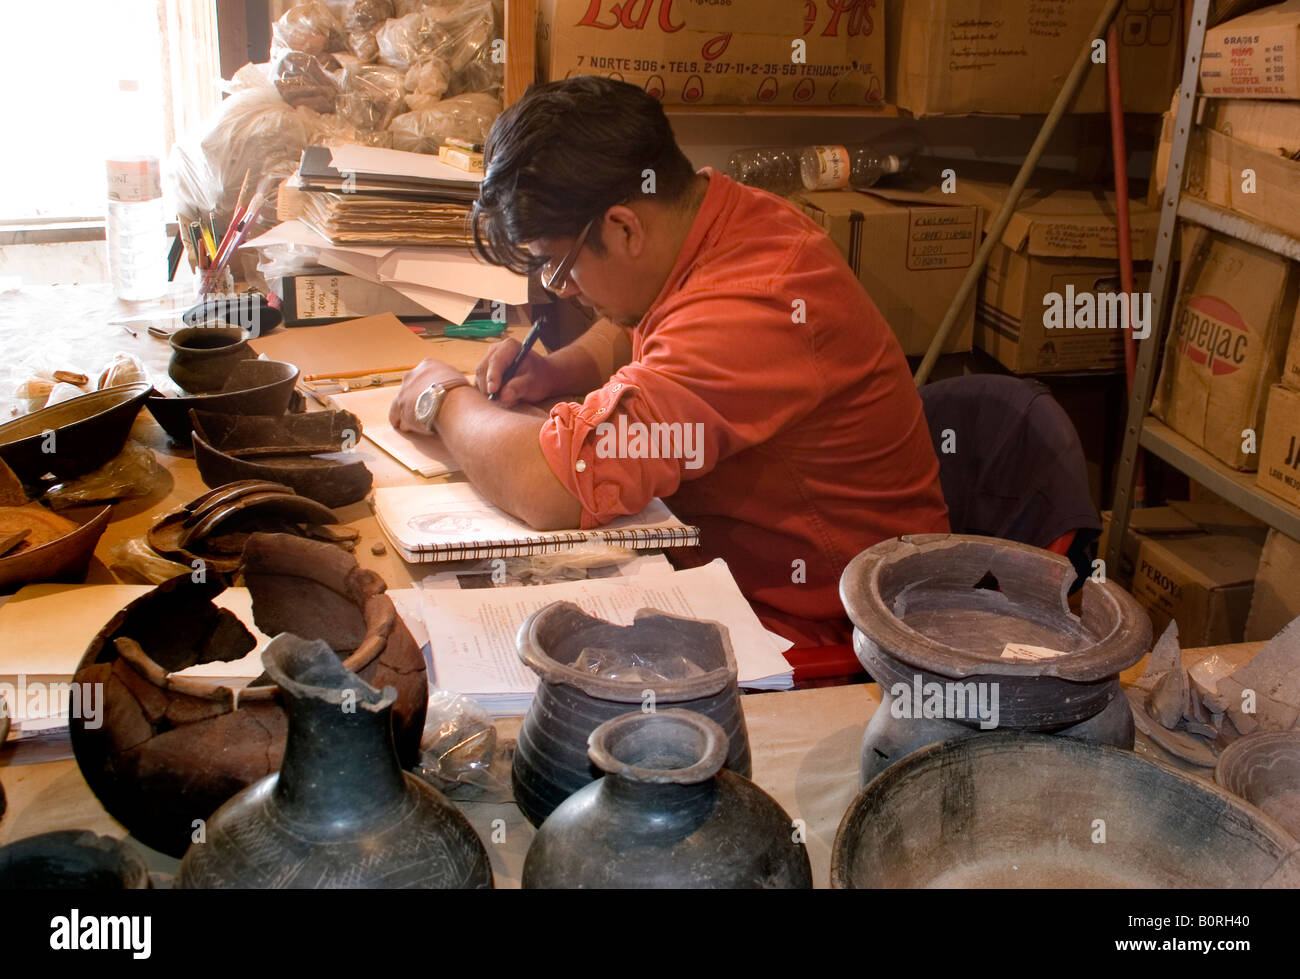 An archaeologist draws ceramic artifacts found in an 8th century AD Mesoamerican pre-Columbian village site in Oaxaca Mexico Stock Photo